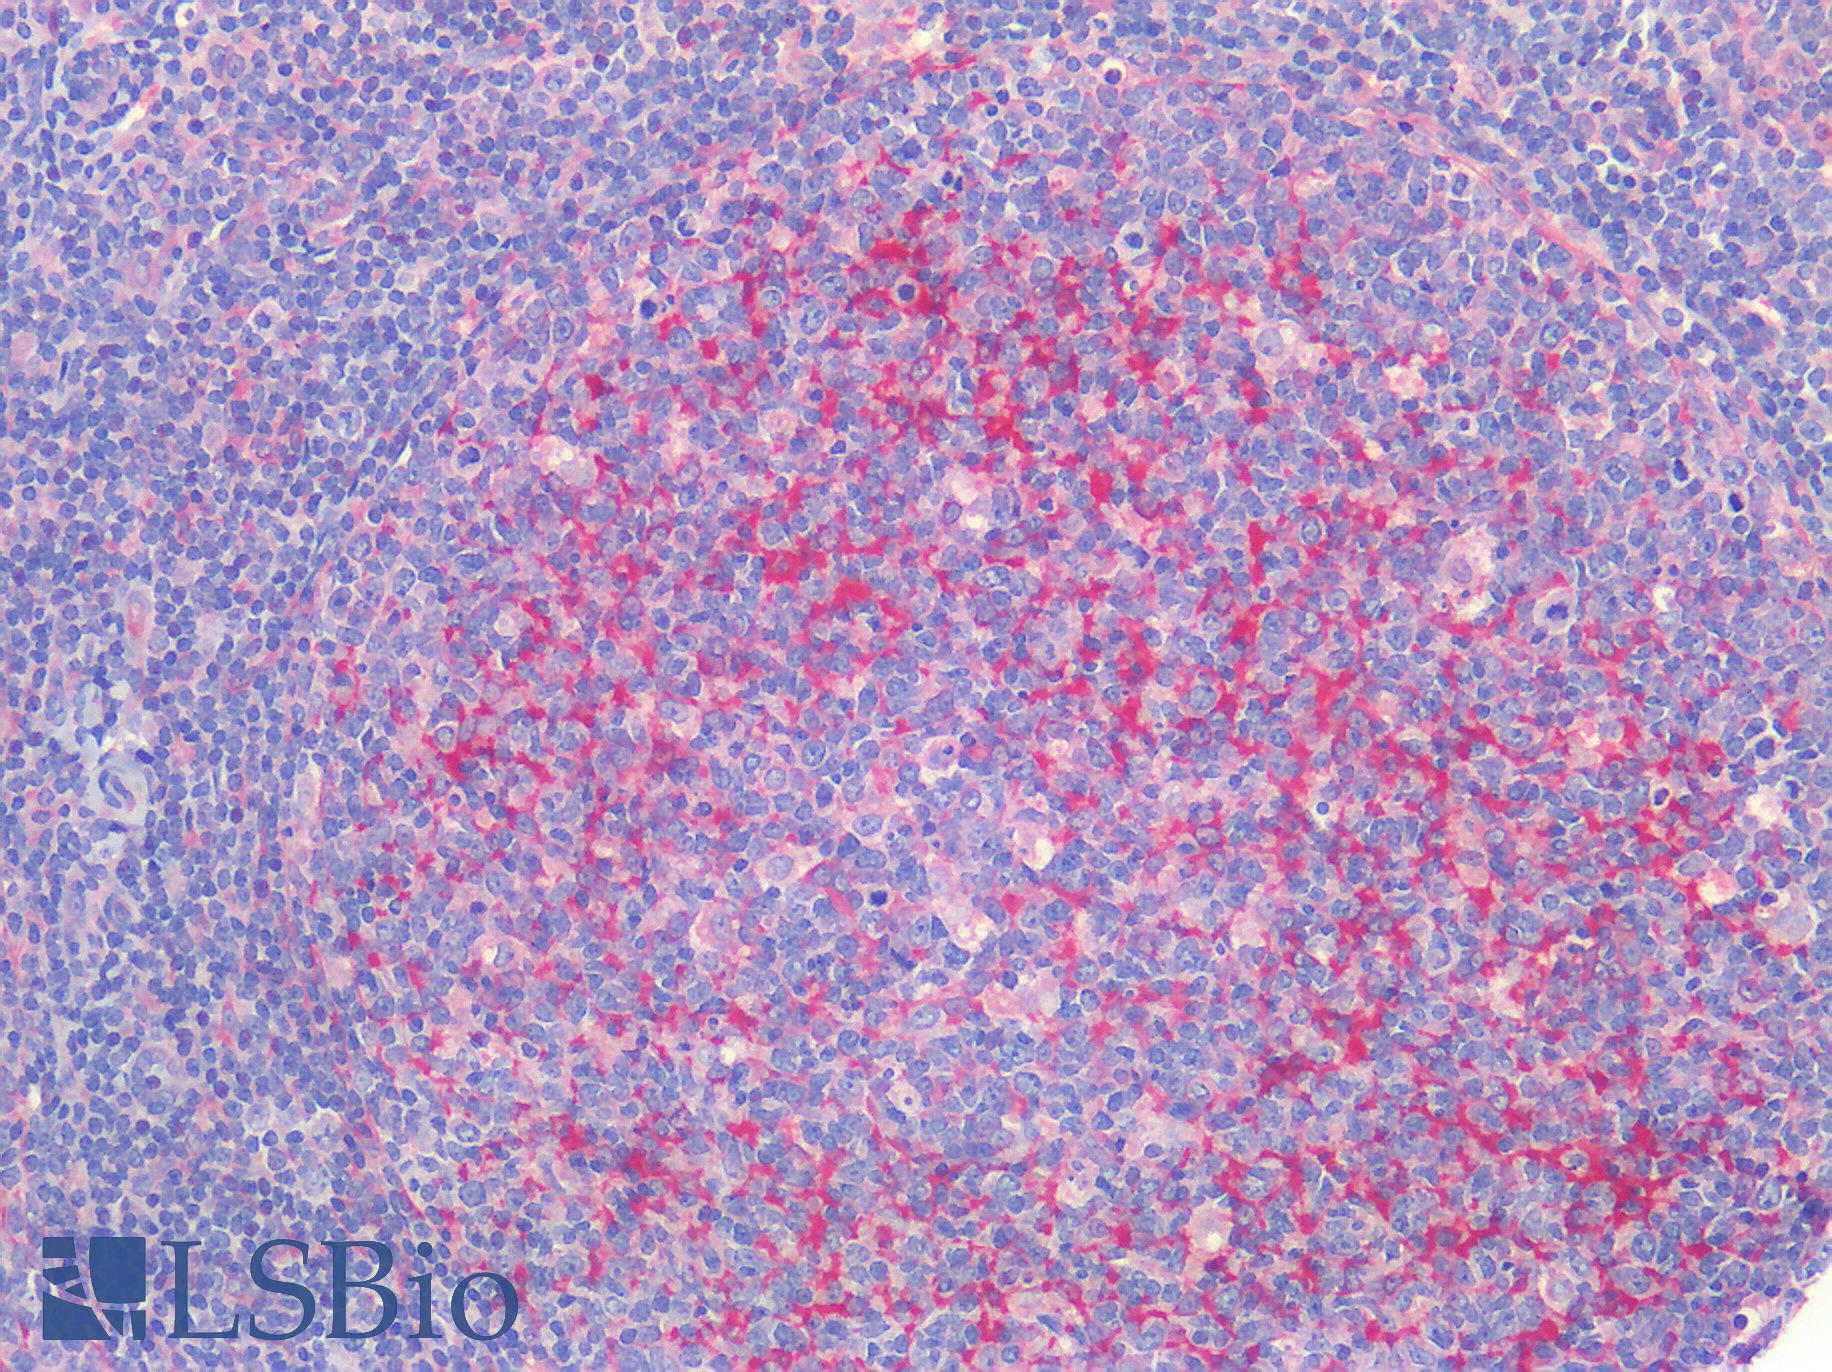 CX3CL1 / Fractalkine Antibody - Human Tonsil: Formalin-Fixed, Paraffin-Embedded (FFPE)